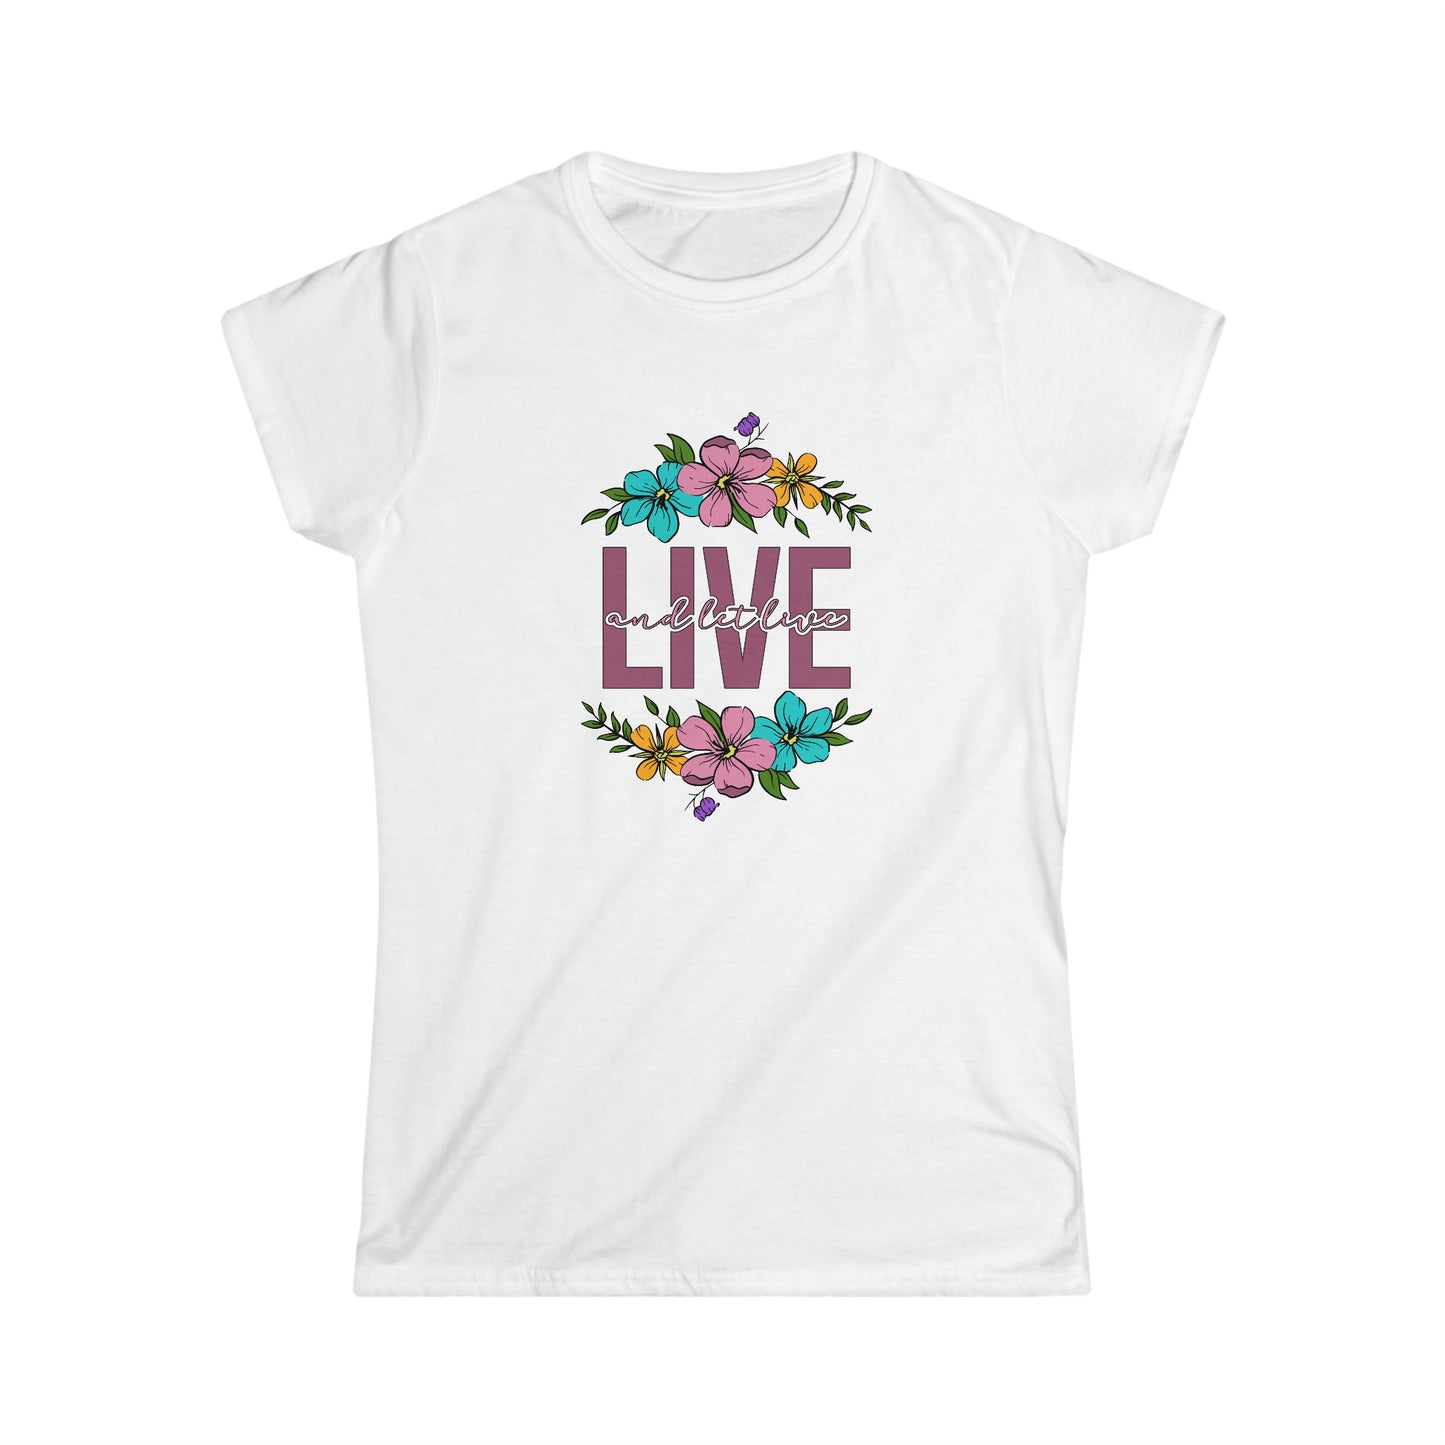 'Live and Let Live' Cute Inspiring Women's T-shirt